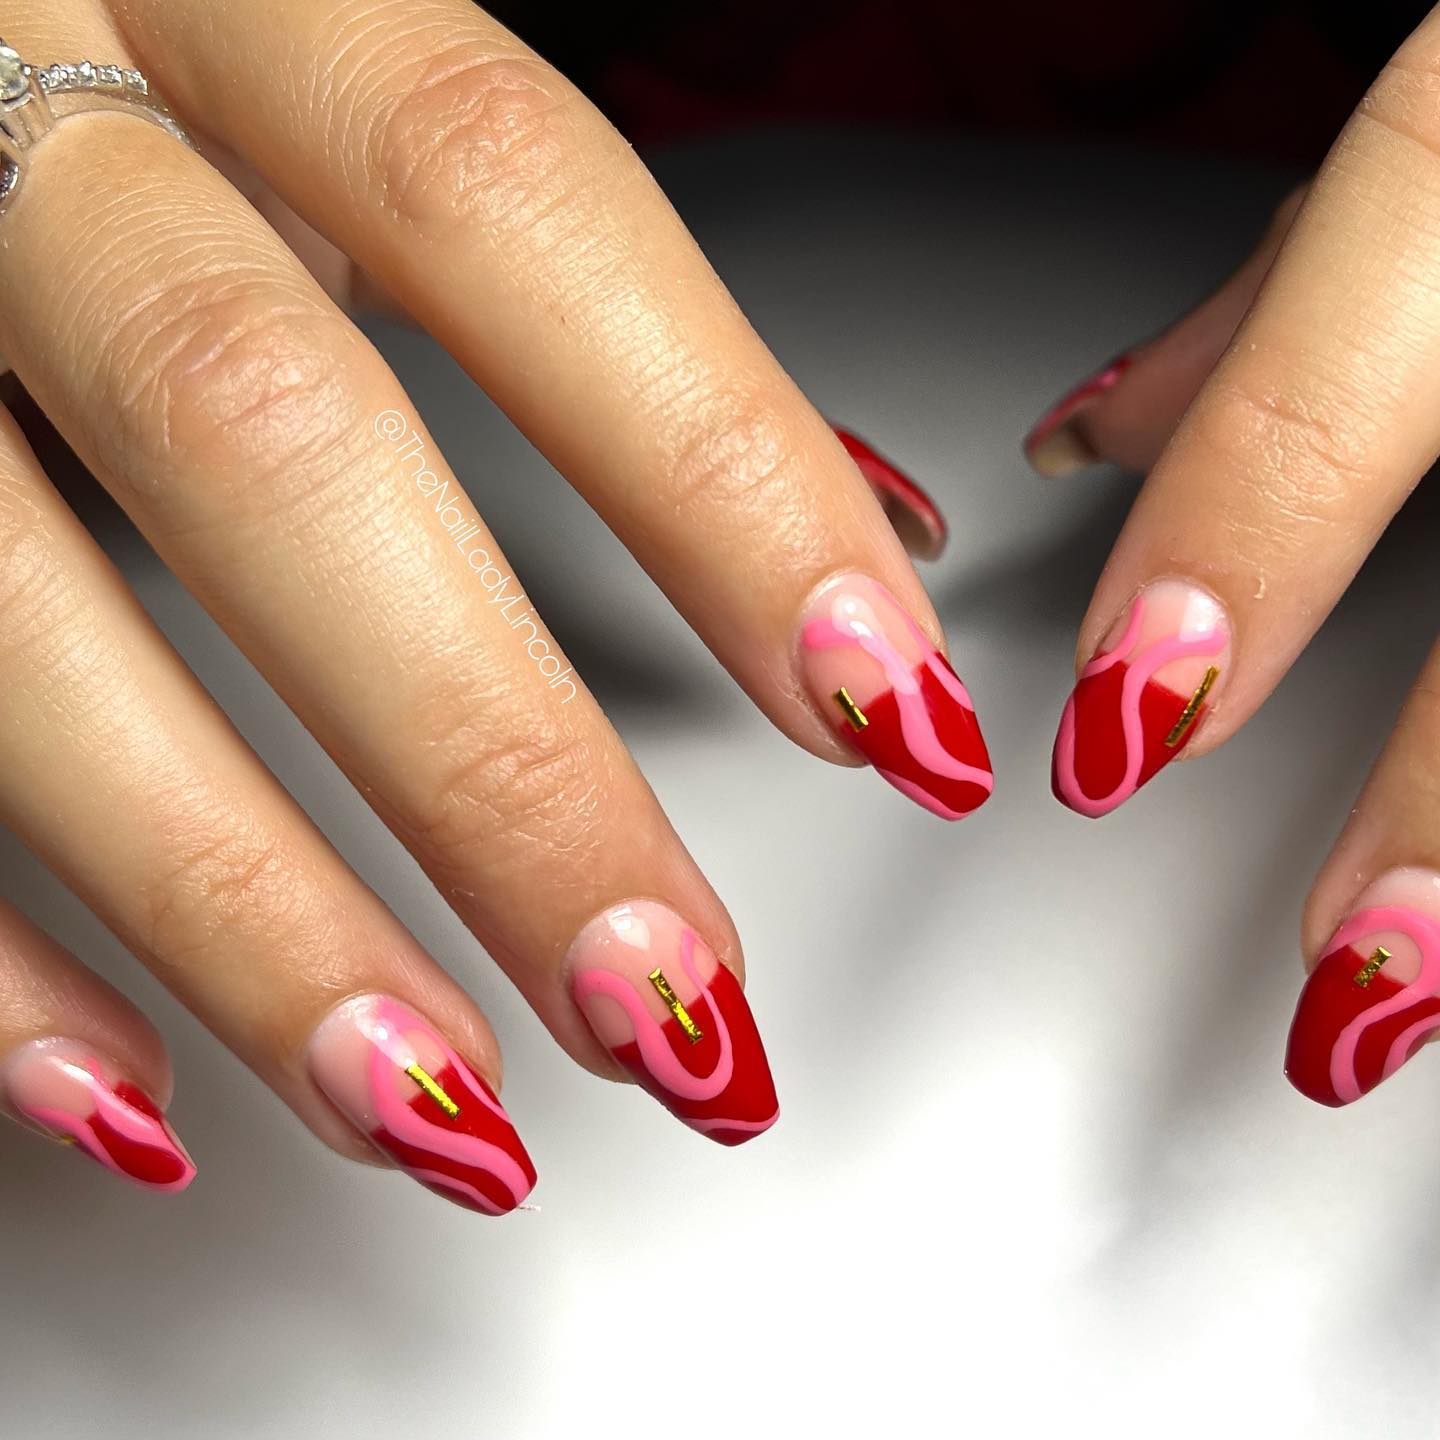 Mixing pink with red color is a good idea for most of the time. Half red nails and red lines will make you rock!